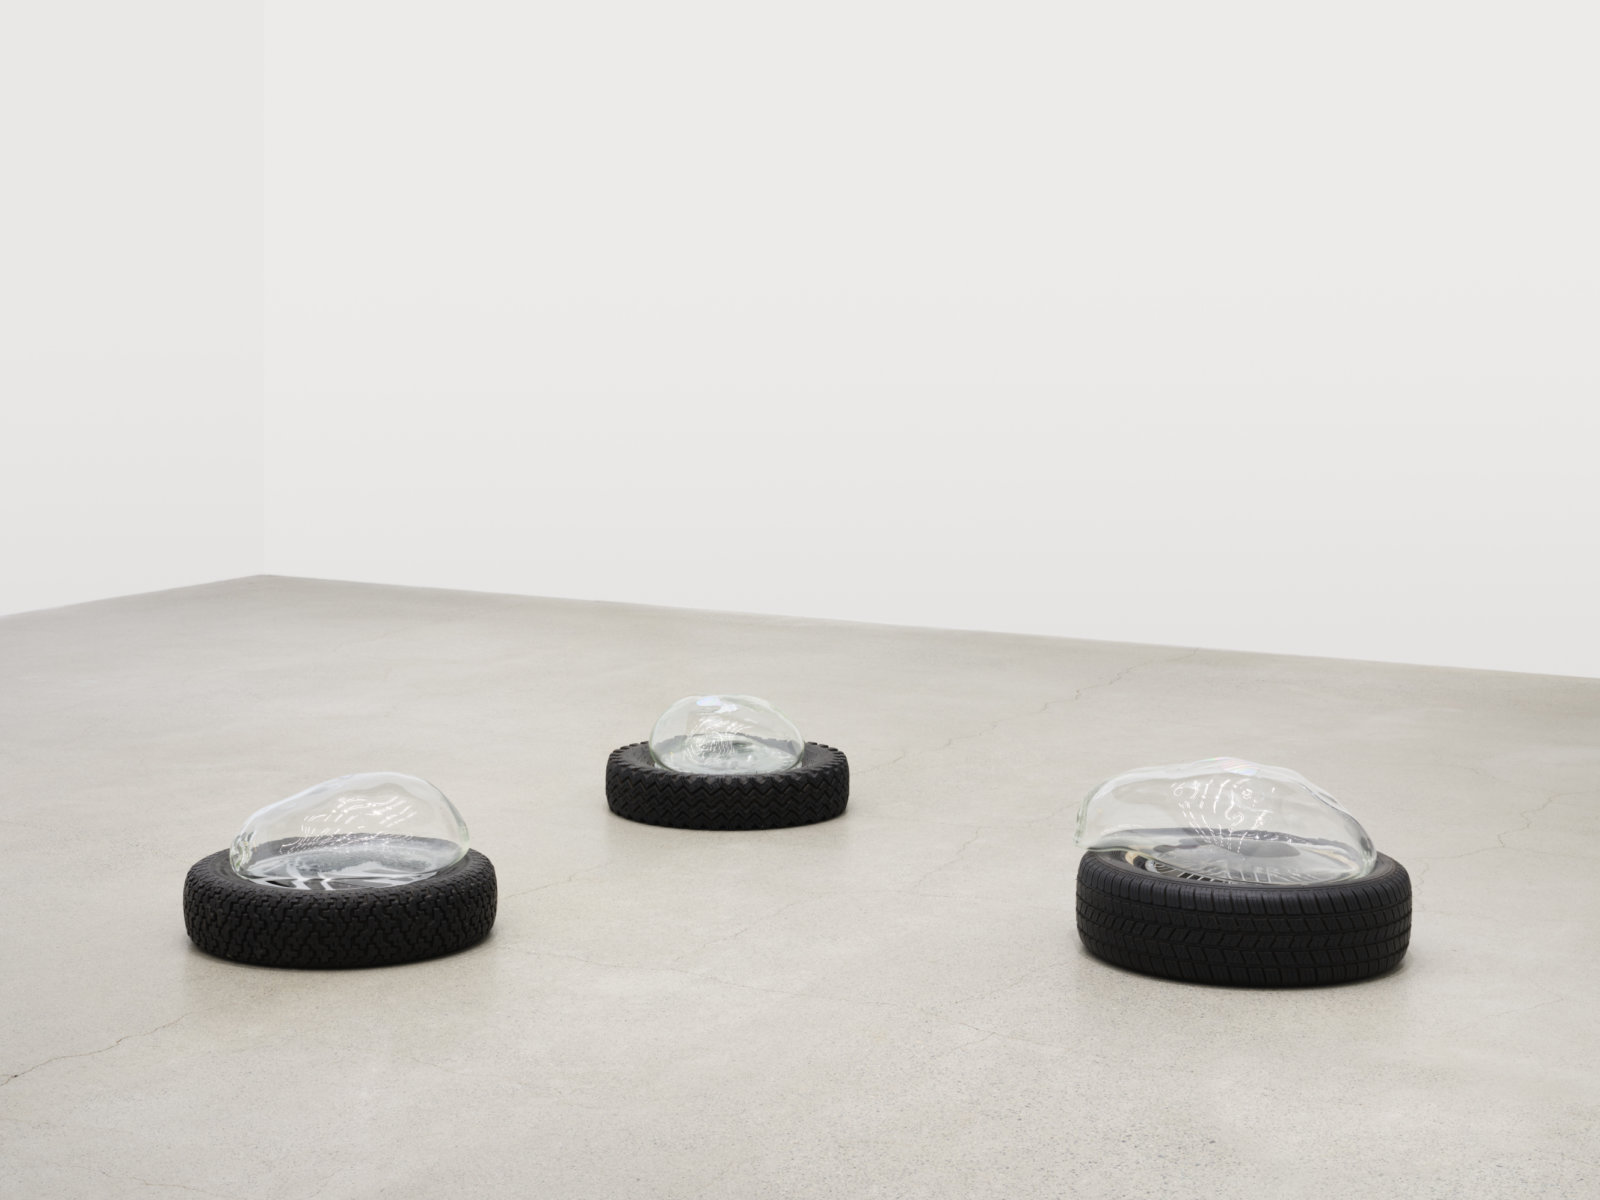 Jerry Pethick, Aerial View, 2001–2002, tires, spectrafoil cut-outs, black silicone, blown glass, dimensions variable